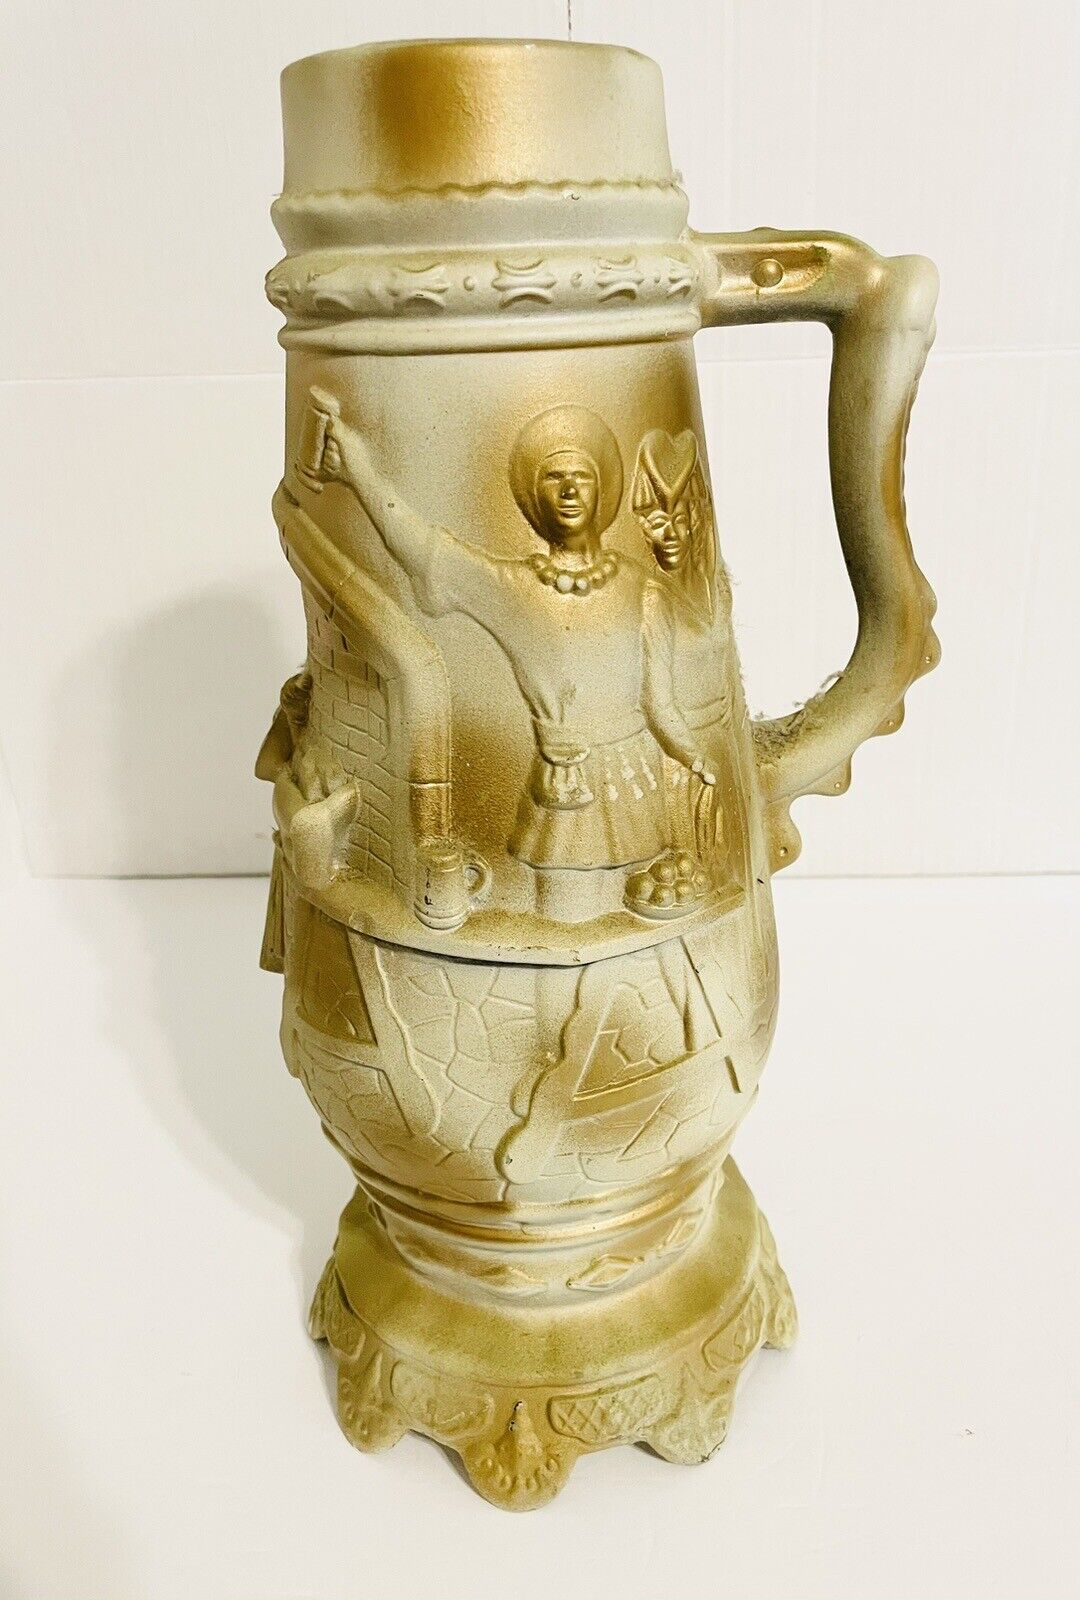 Vintage LOMA 1960 Signed Beer Stein Renaissance Fair Style